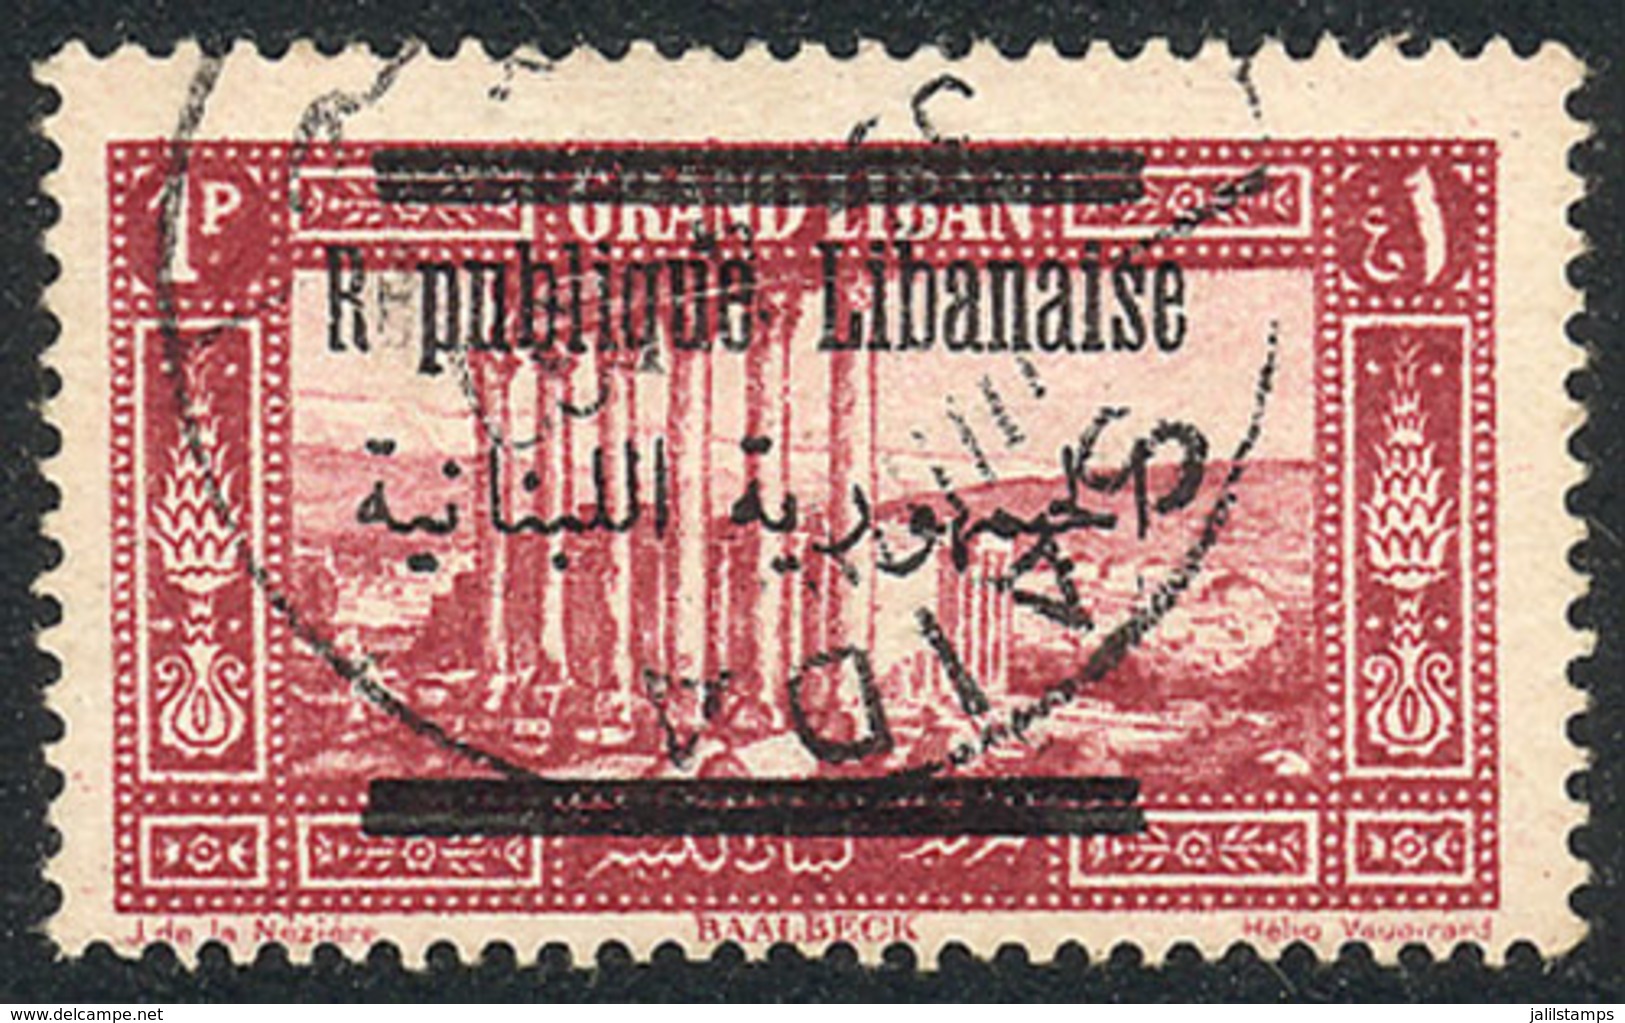 1516 LEBANON: Yvert 86, With ""R Publique"" Variety, VF Quality!" - Liban